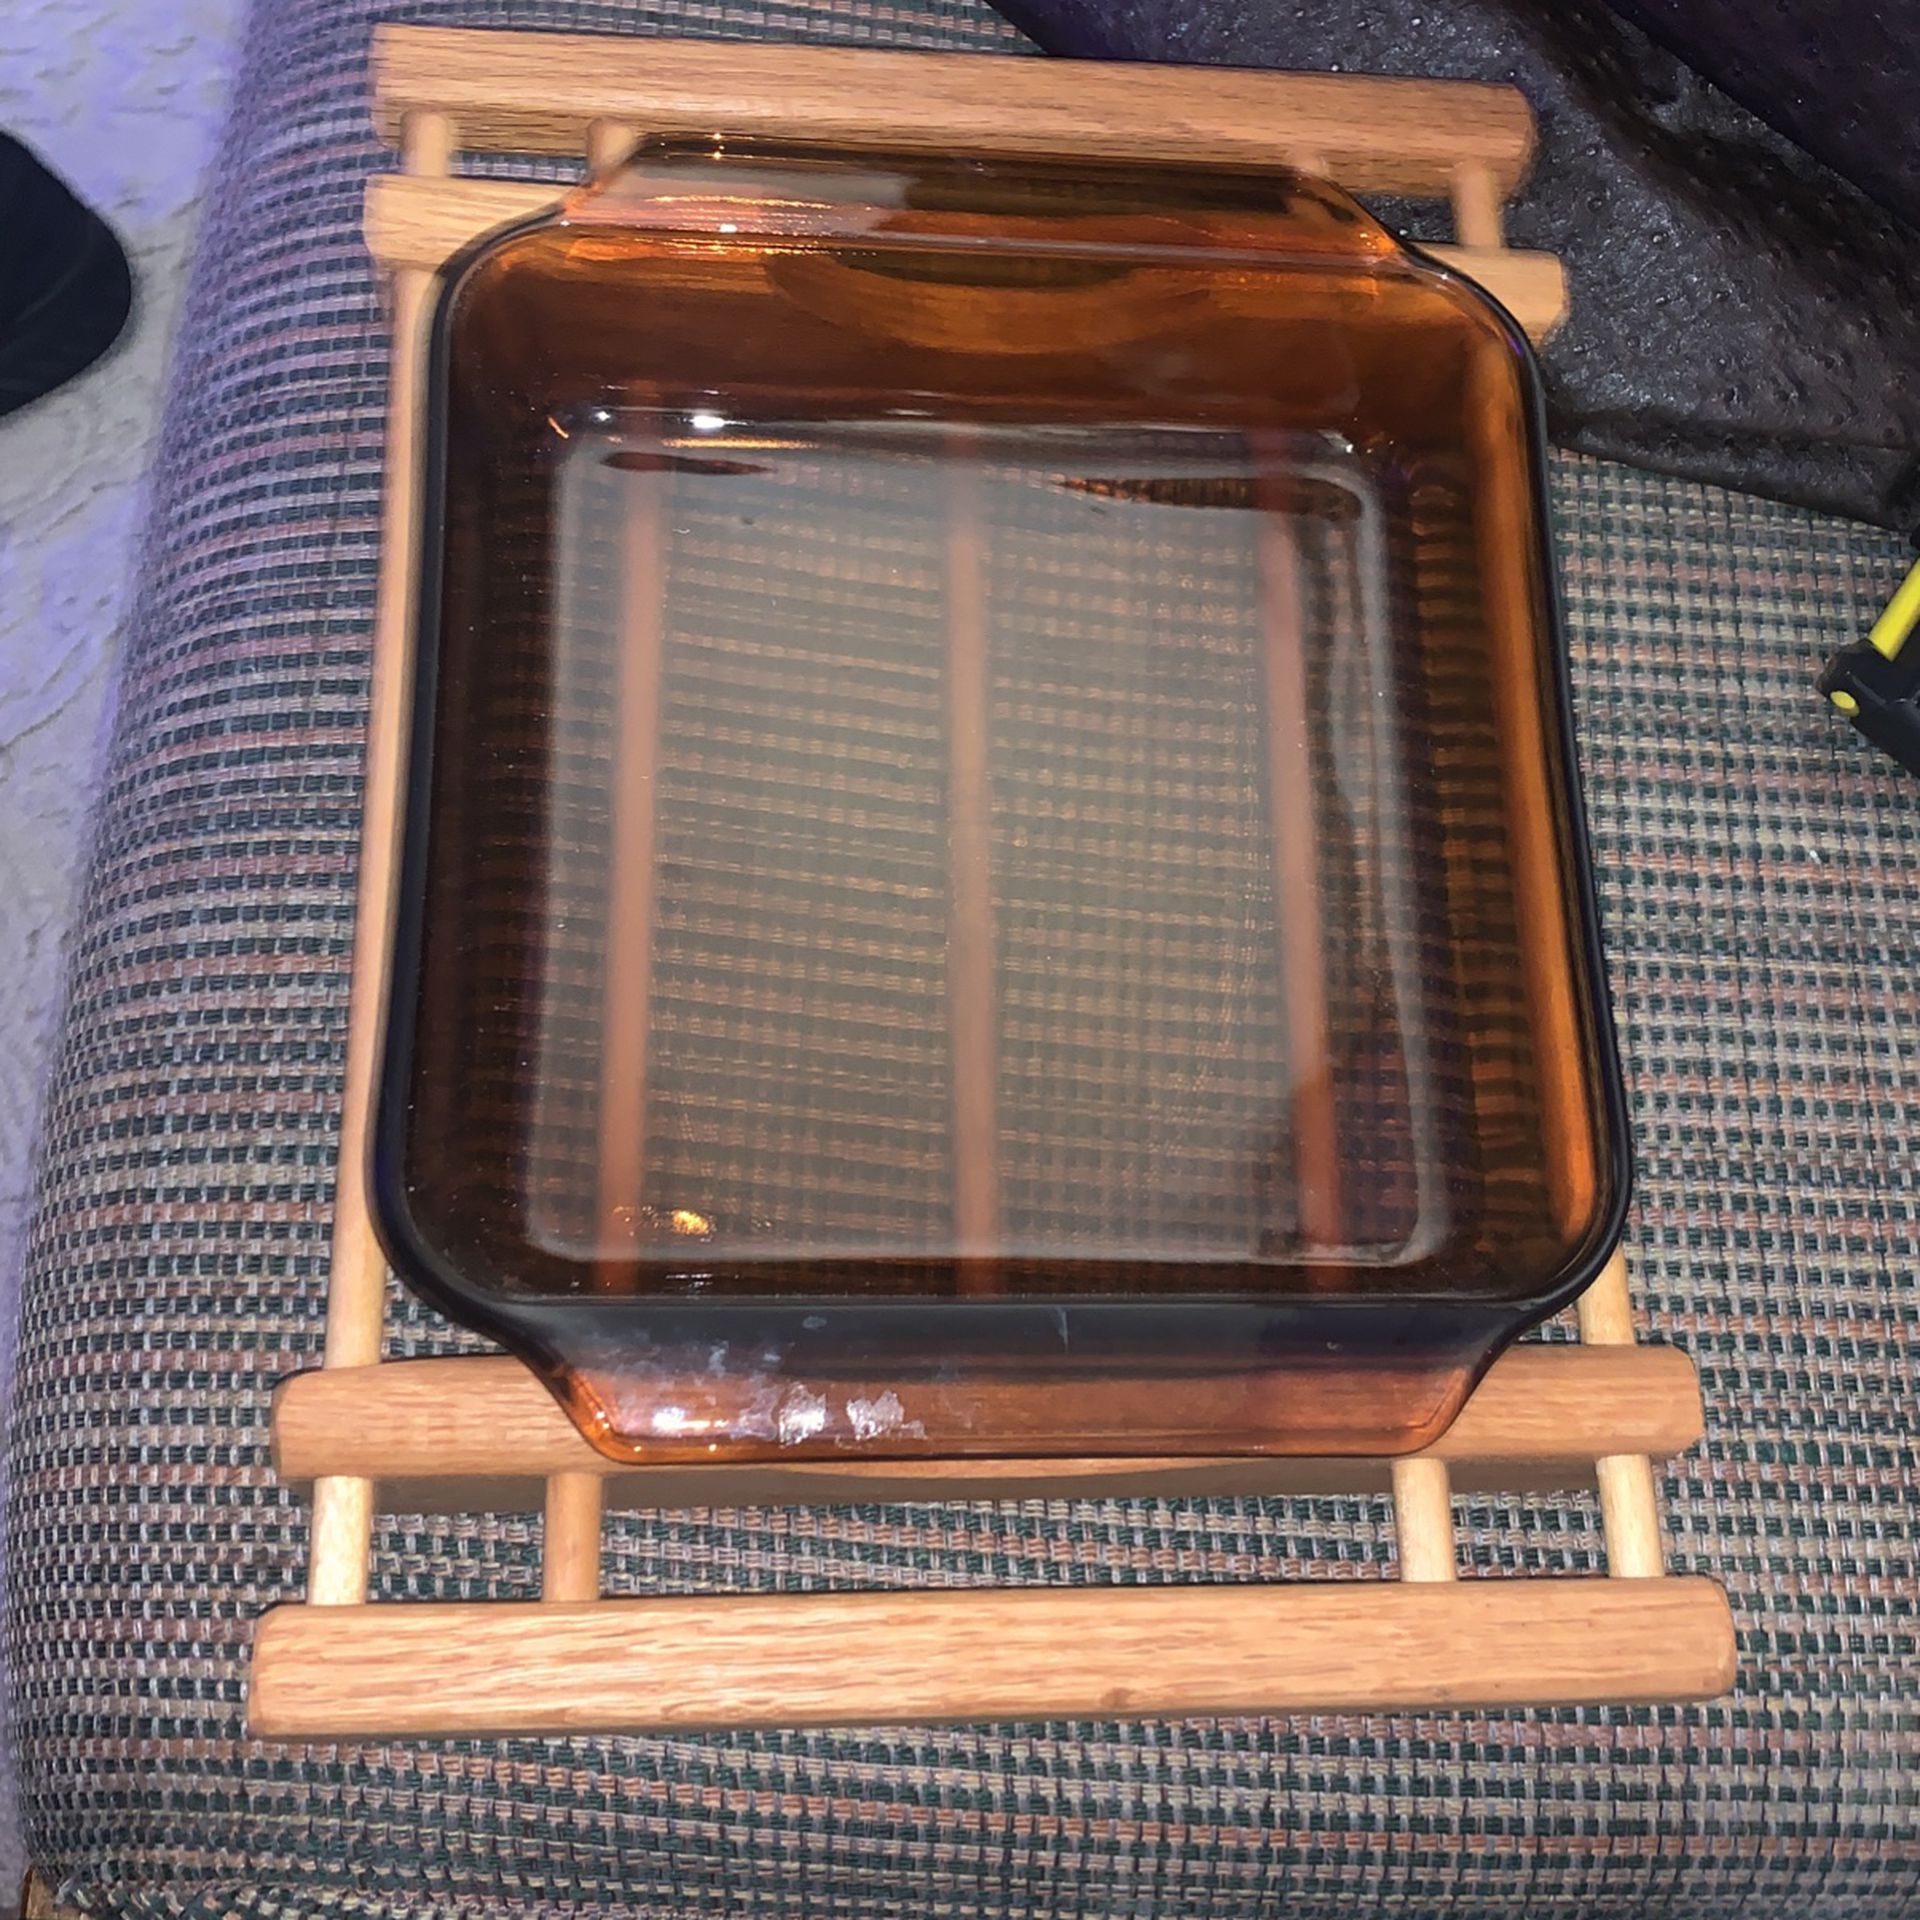 Vintage Anchor Hocking 8x8 Inch Glass Pan With Wooden Stand Baking Dish